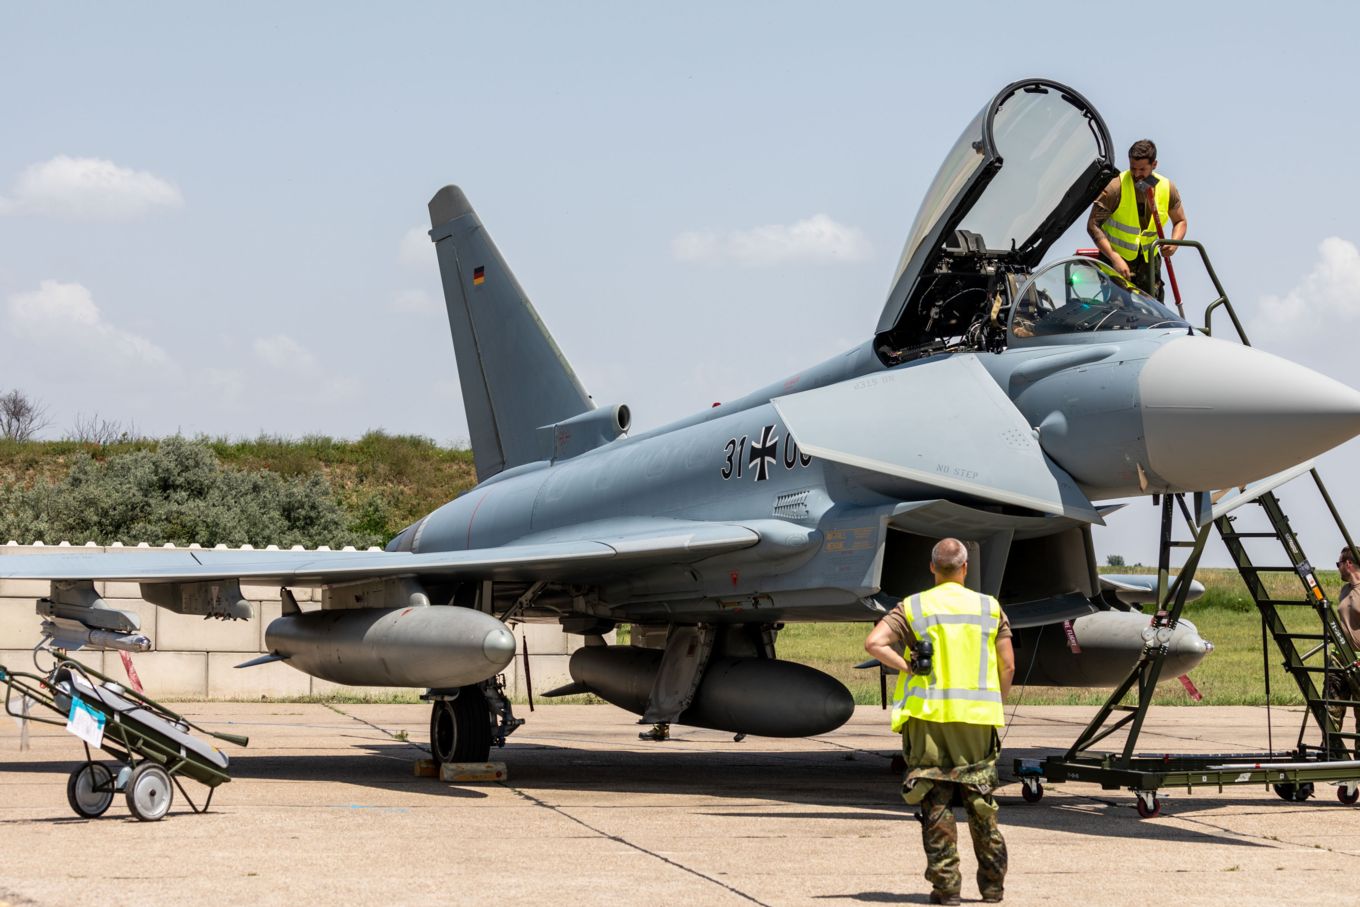 Maintenance of Eurofighter on the ground.